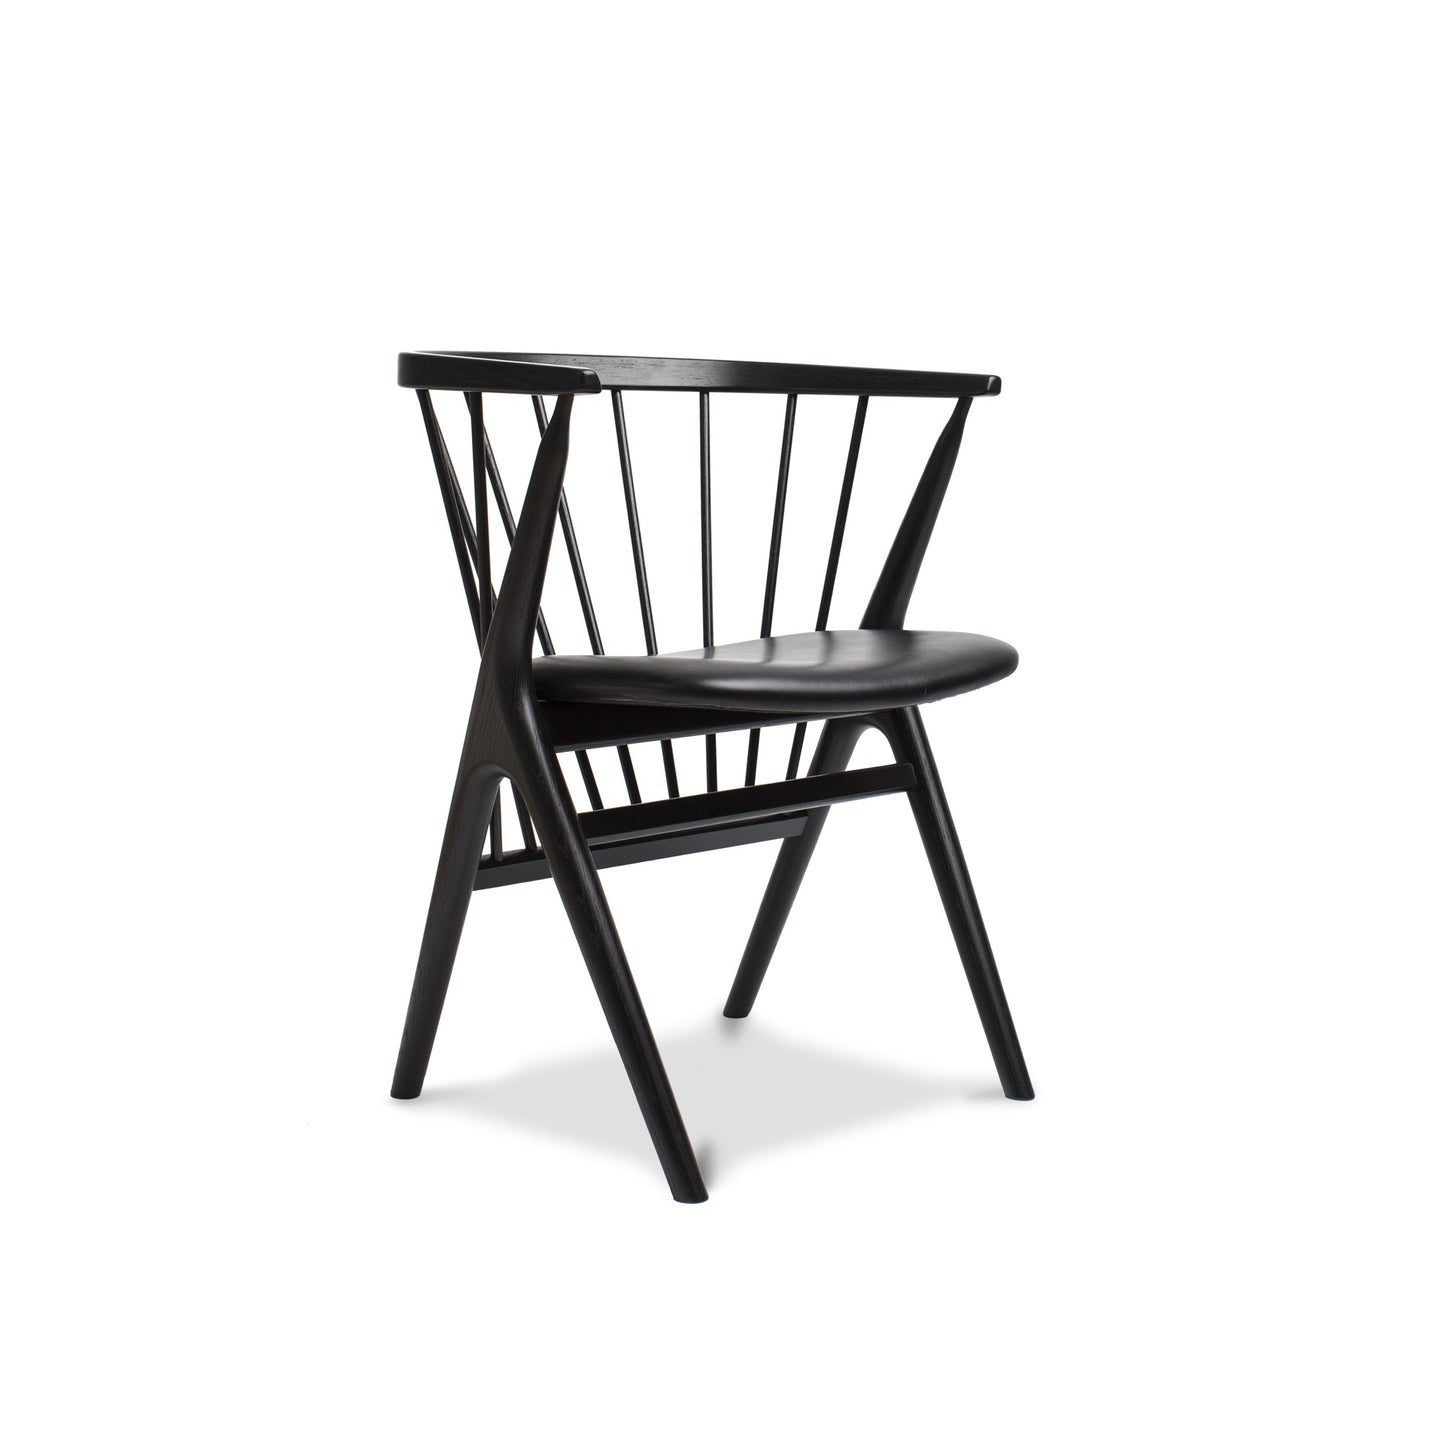 No 8 Dining Chair by Sibast Furniture #Black Oak and Black Leather